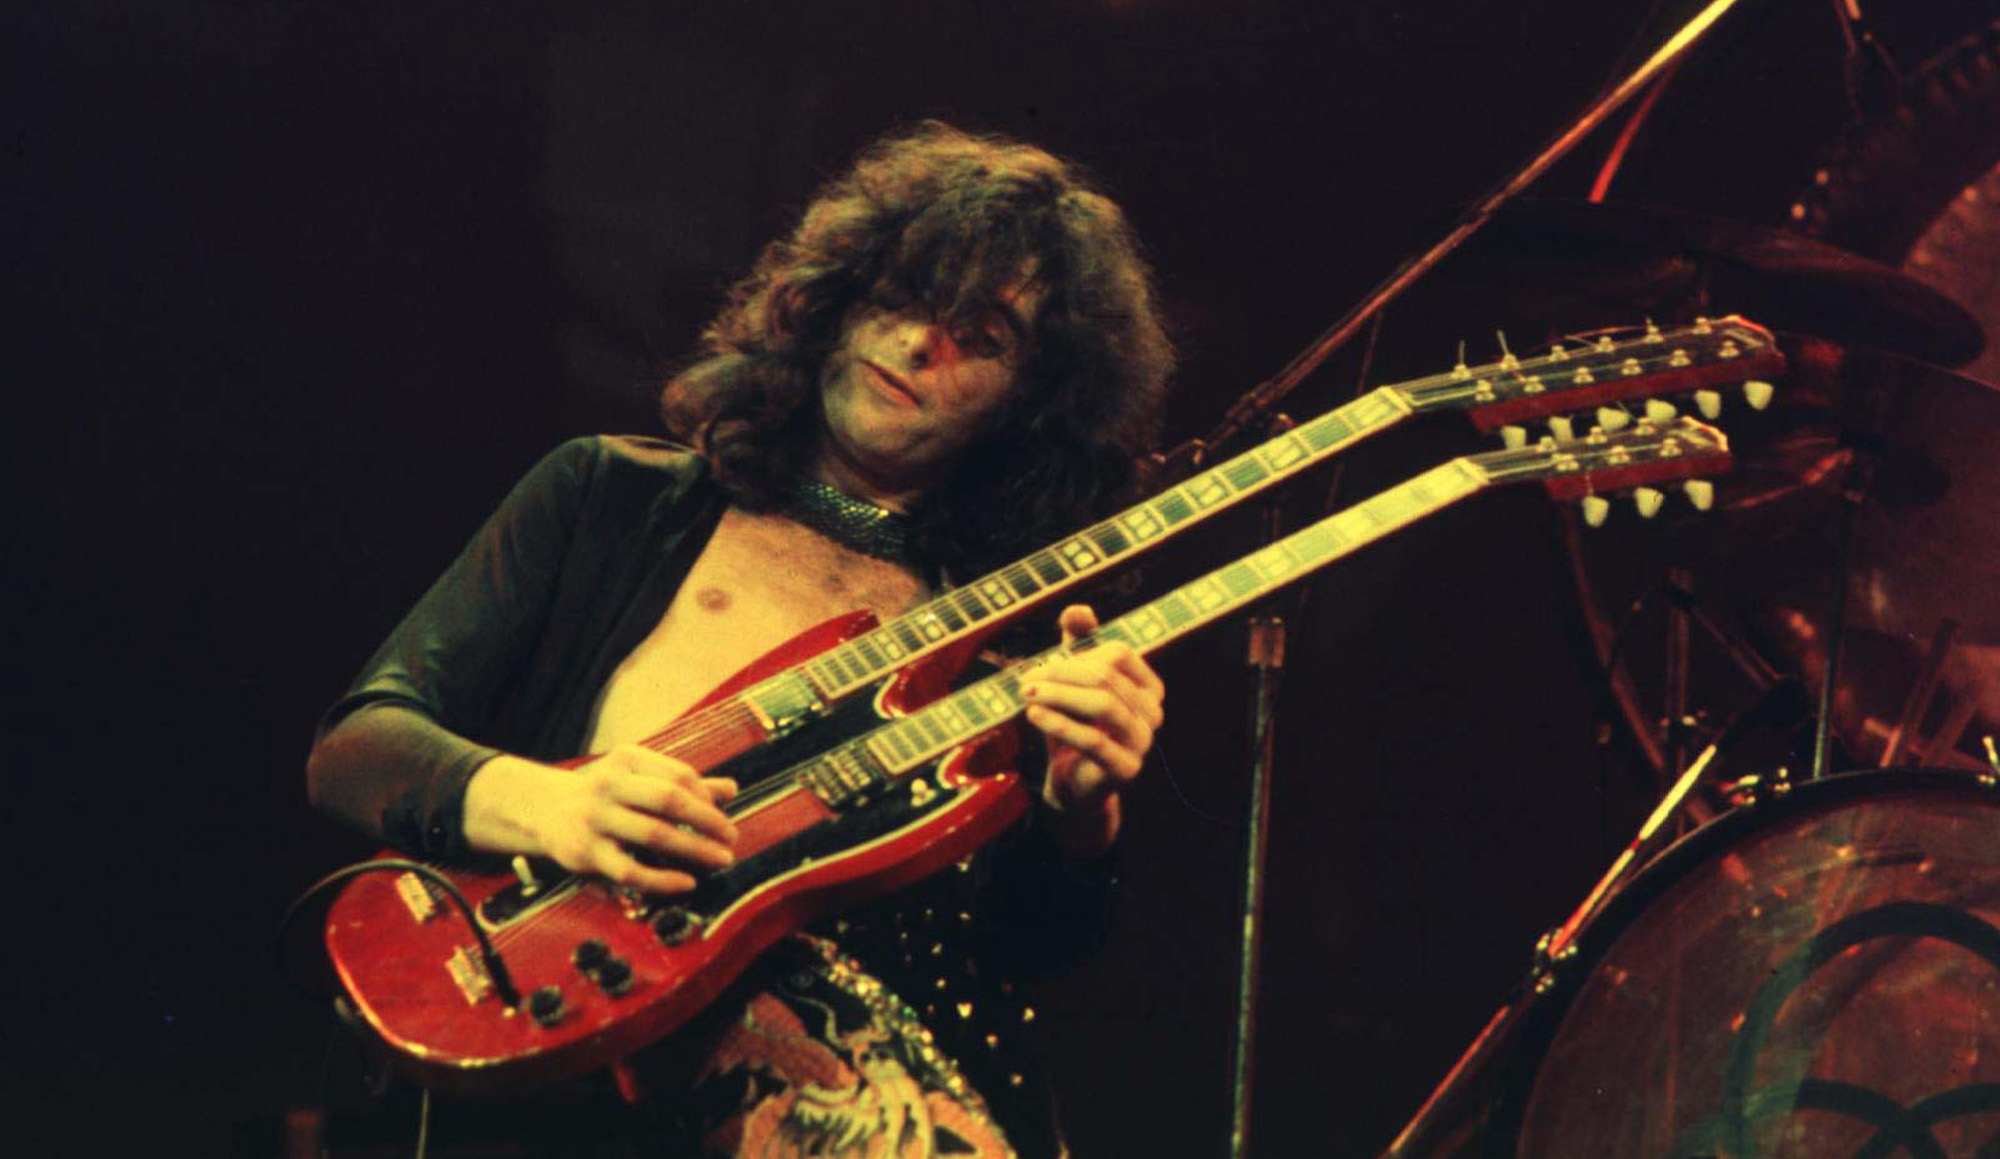 Jimmy Page performs with Led Zeppelin at Chicago Stadium in Chicago, Illinois on January 20, 1975